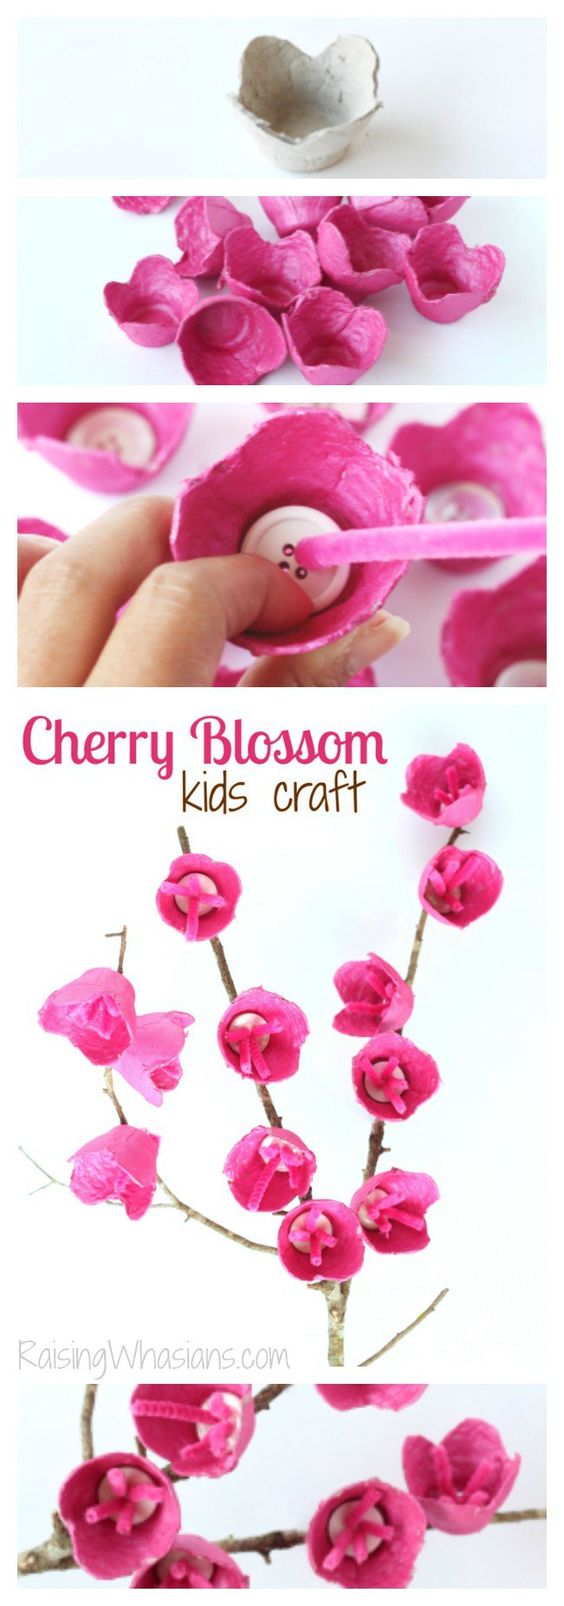 Upcycle Old Egg Cartons into Cherry Blossom Craft for Kids. 